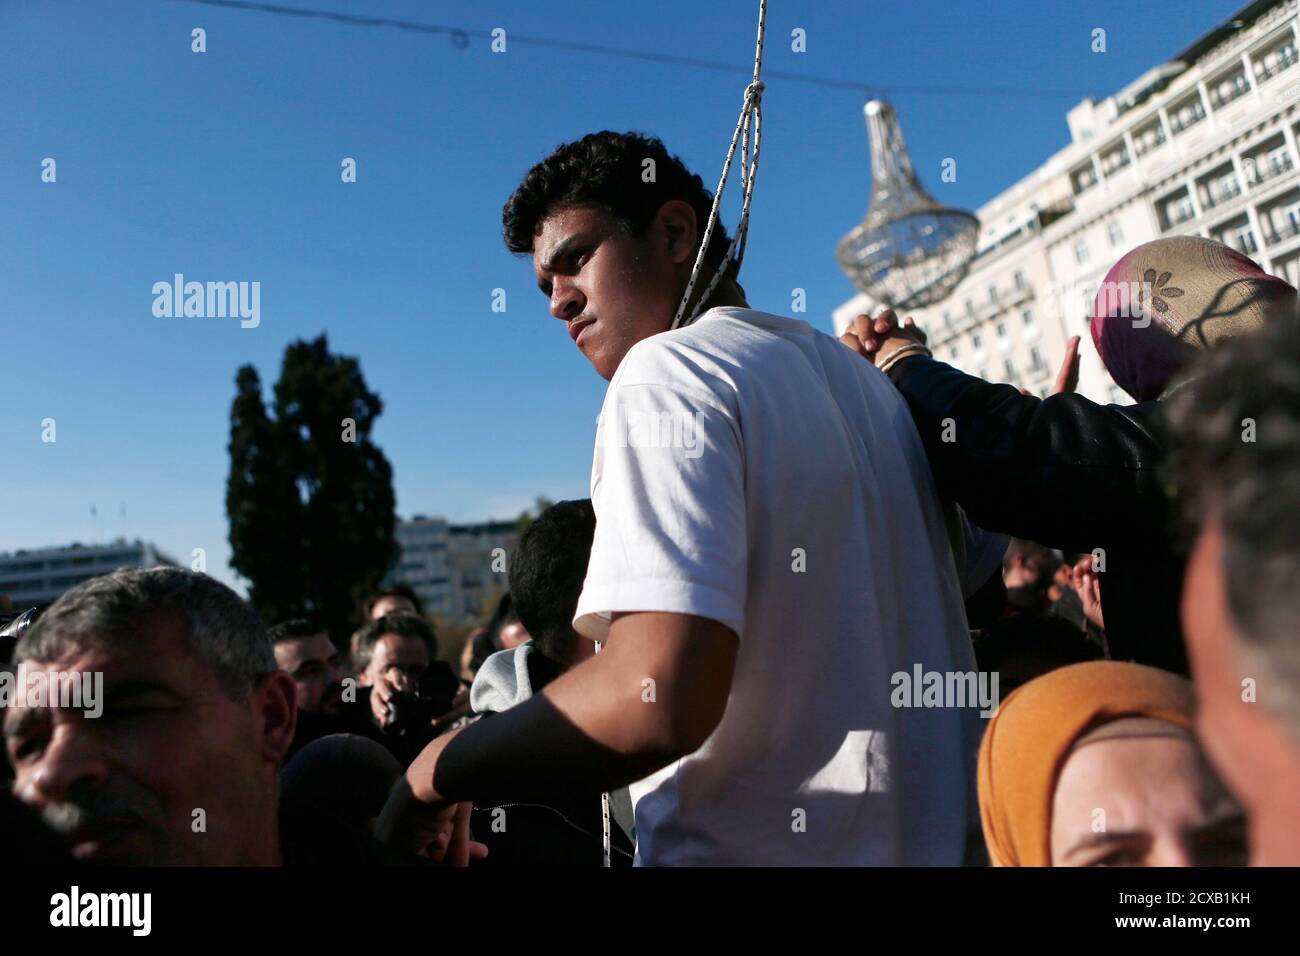 A Syrian refugee with a noose around his neck protests at the main Syntagma square in Athens December 14, 2014. Greece's government has said it could do little to help about 300 Syrian refugees camped outside parliament for weeks because none of them had applied for asylum or shelter. The Syrian refugees, including women and children, have defied the rain and cold to sleep on the pavement opposite parliament since November 19, demanding the right of passage to other European countries to be reunited with family members.  REUTERS/Alkis Konstantinidis (GREECE - Tags: POLITICS SOCIETY IMMIGRATION Stock Photo